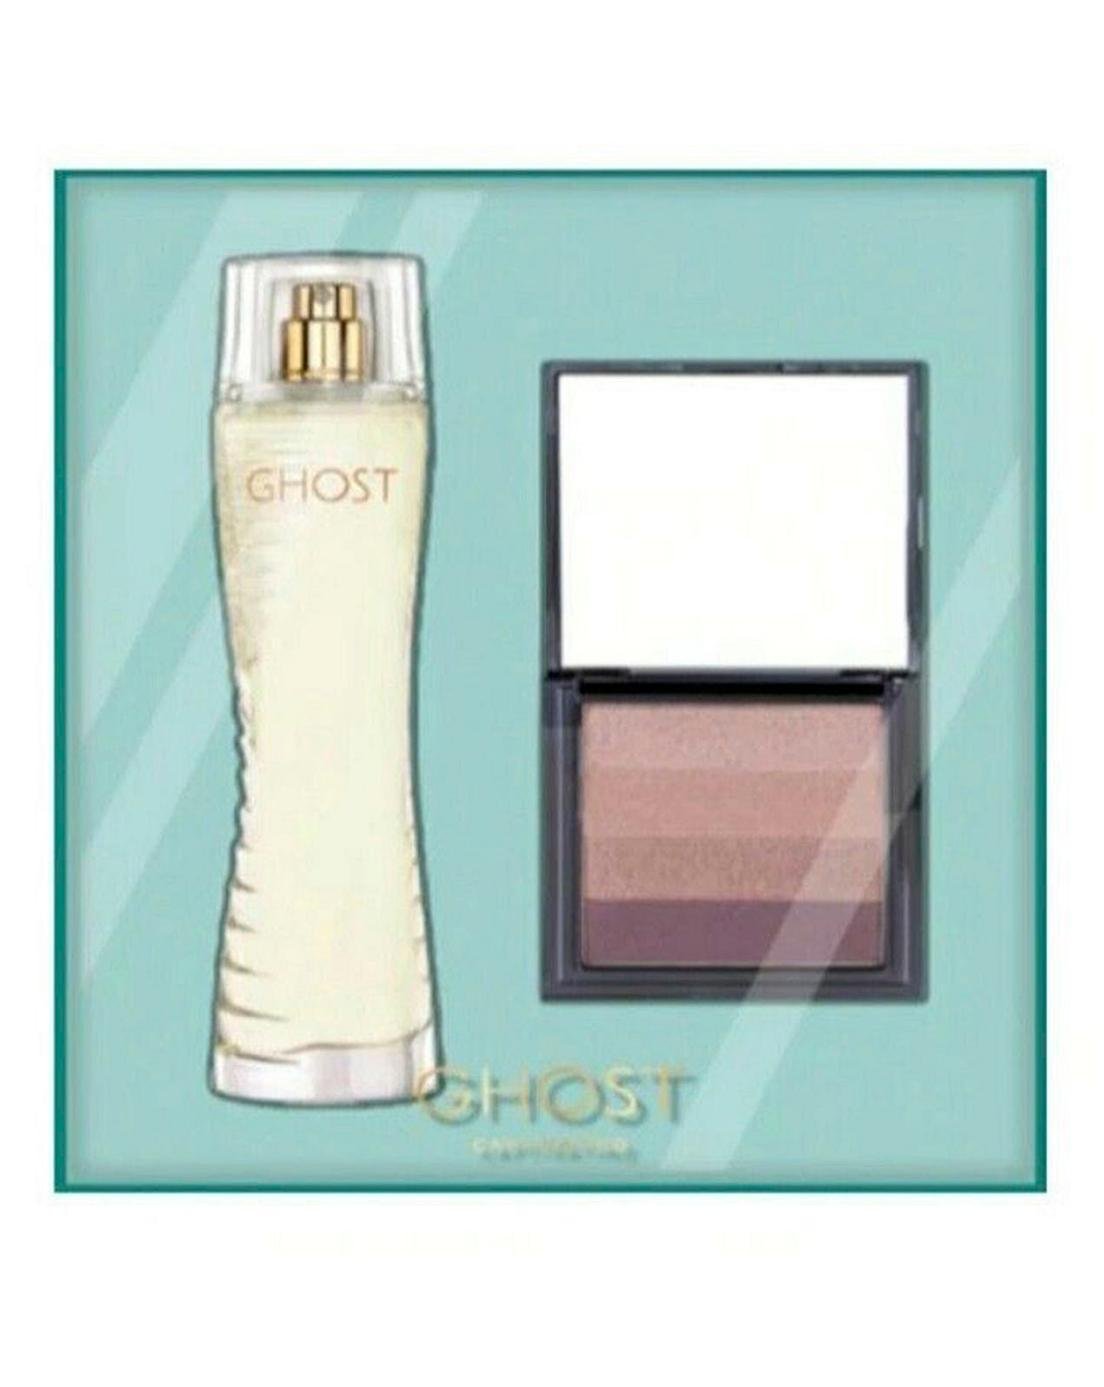 Ghost Captivating 75ml 2pc Giftset